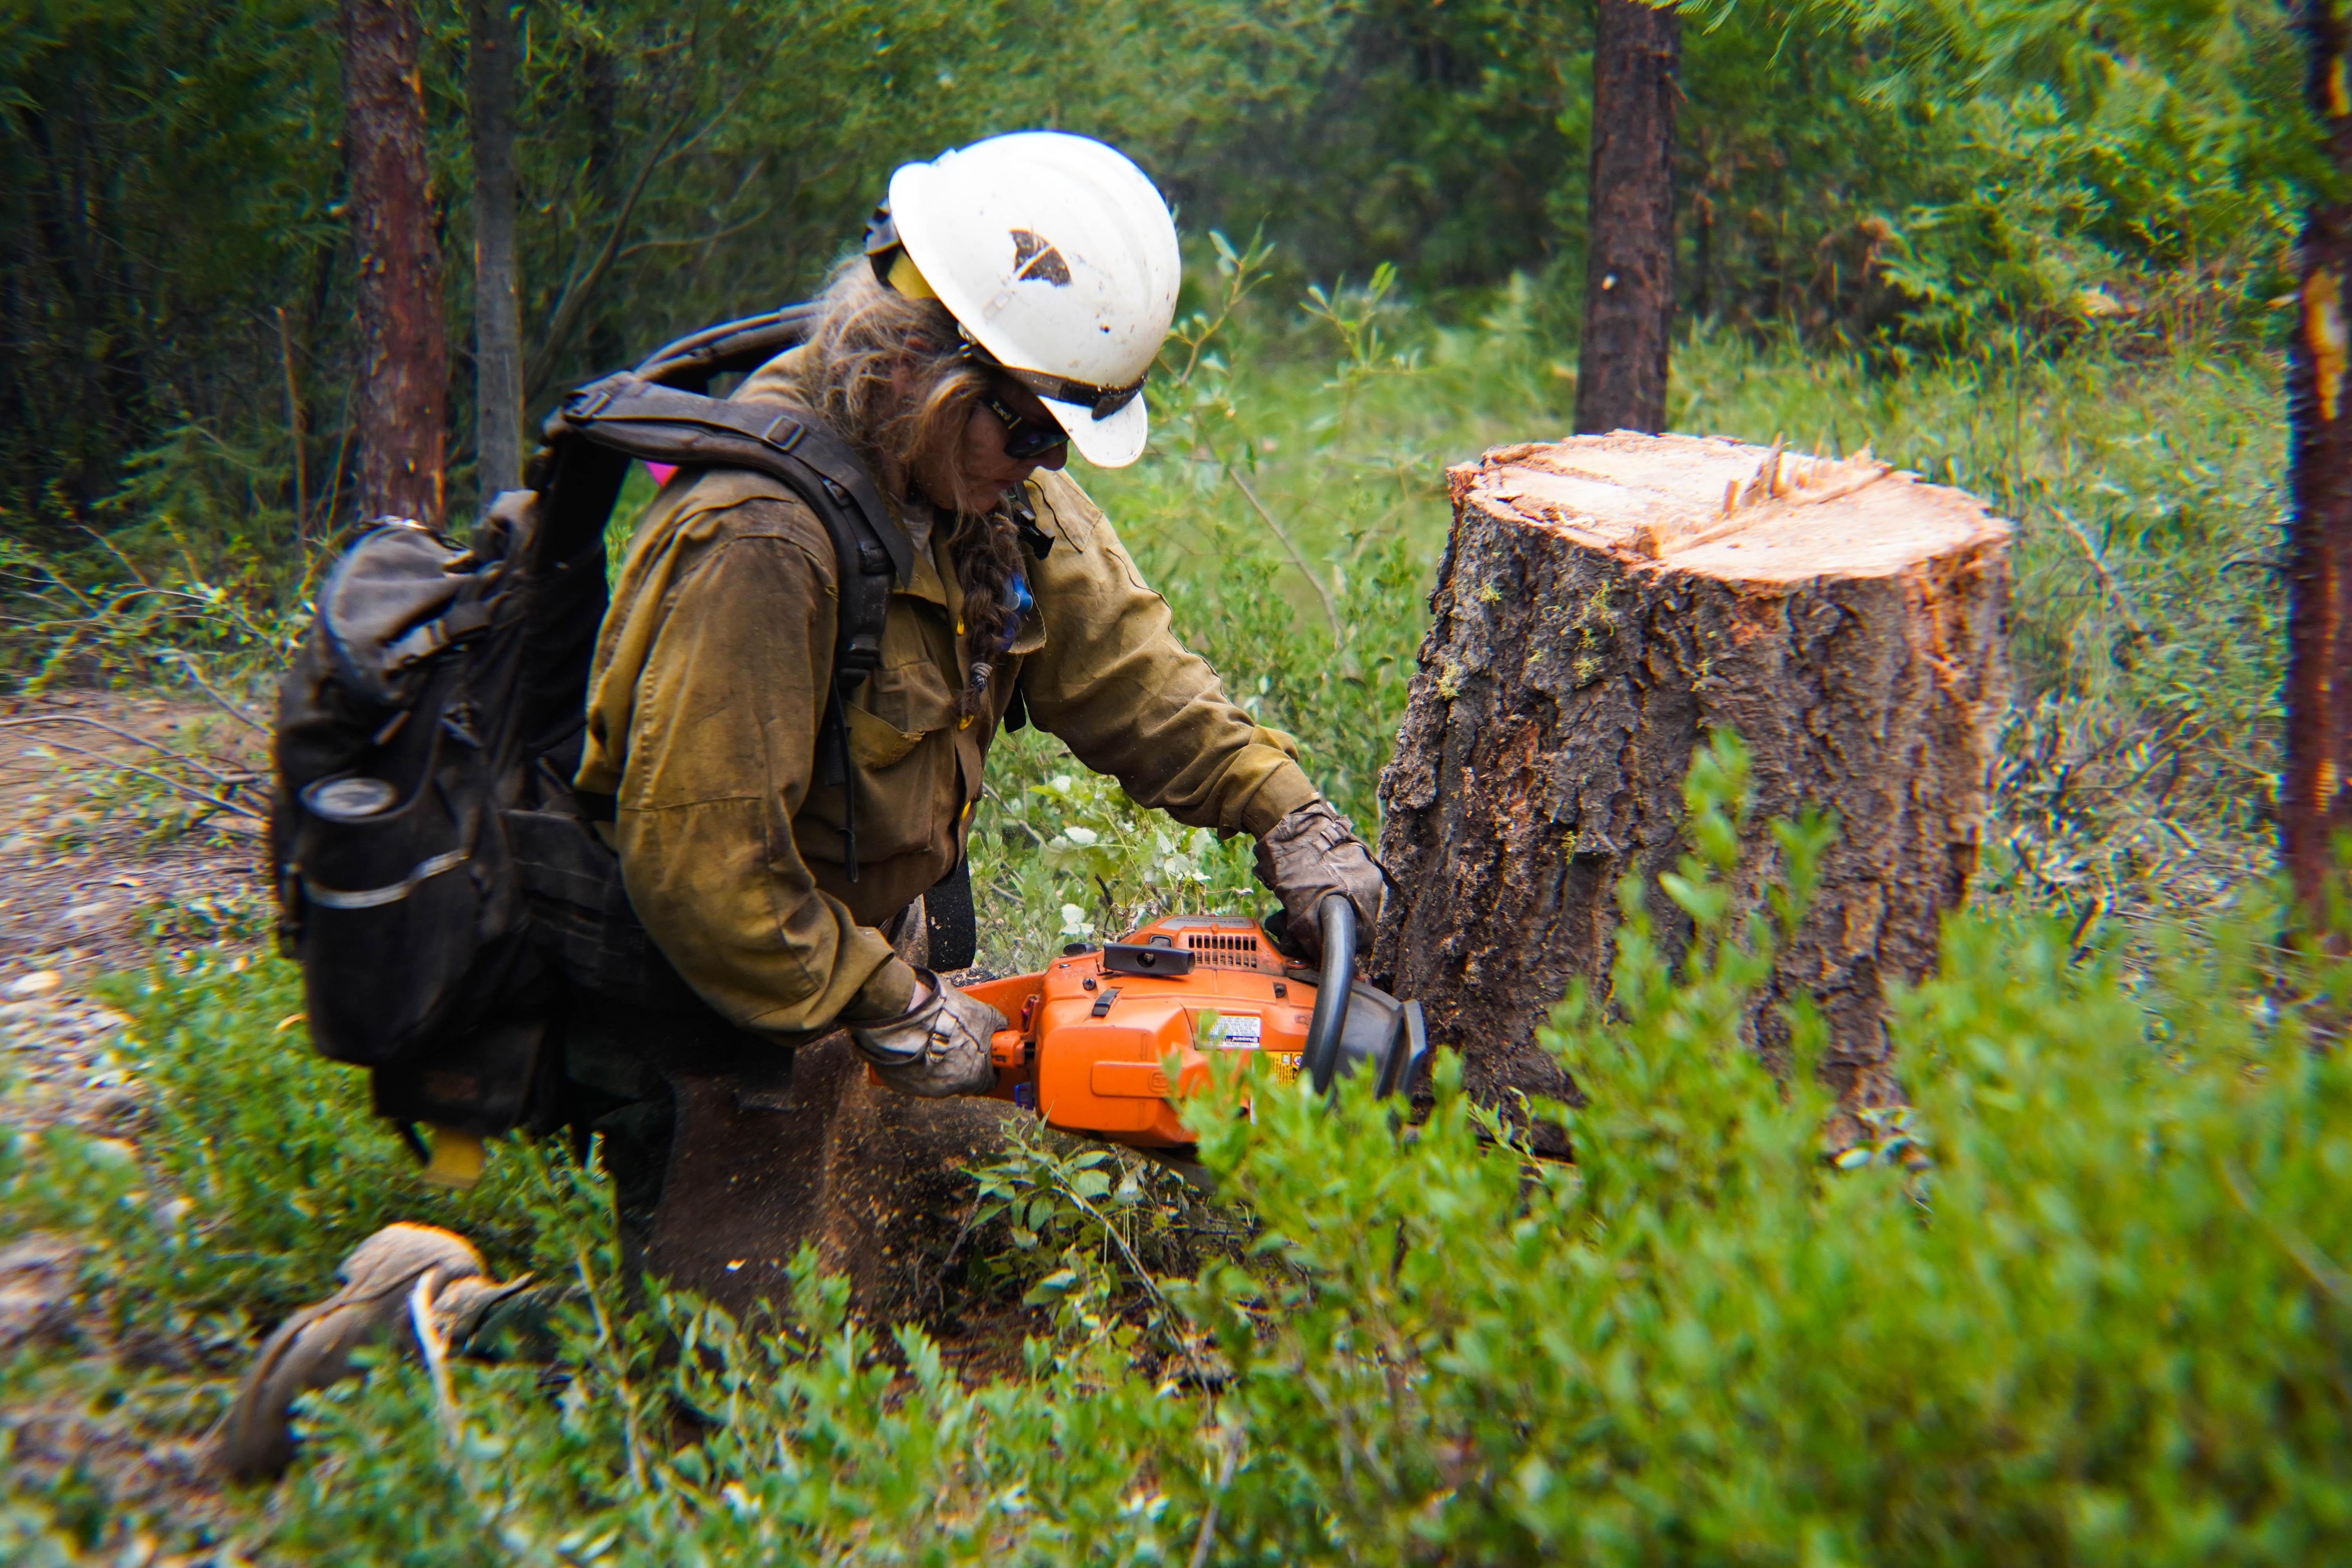 Angela Lockwood, with Firestorm Wildland Fire Suppression, Inc, works providing structure defense for residents of Coffee Creek, Aug 15, 2021, on the River Complex Fire. (U.S. Forest Service photo courtesy of Benjamin Cossel)